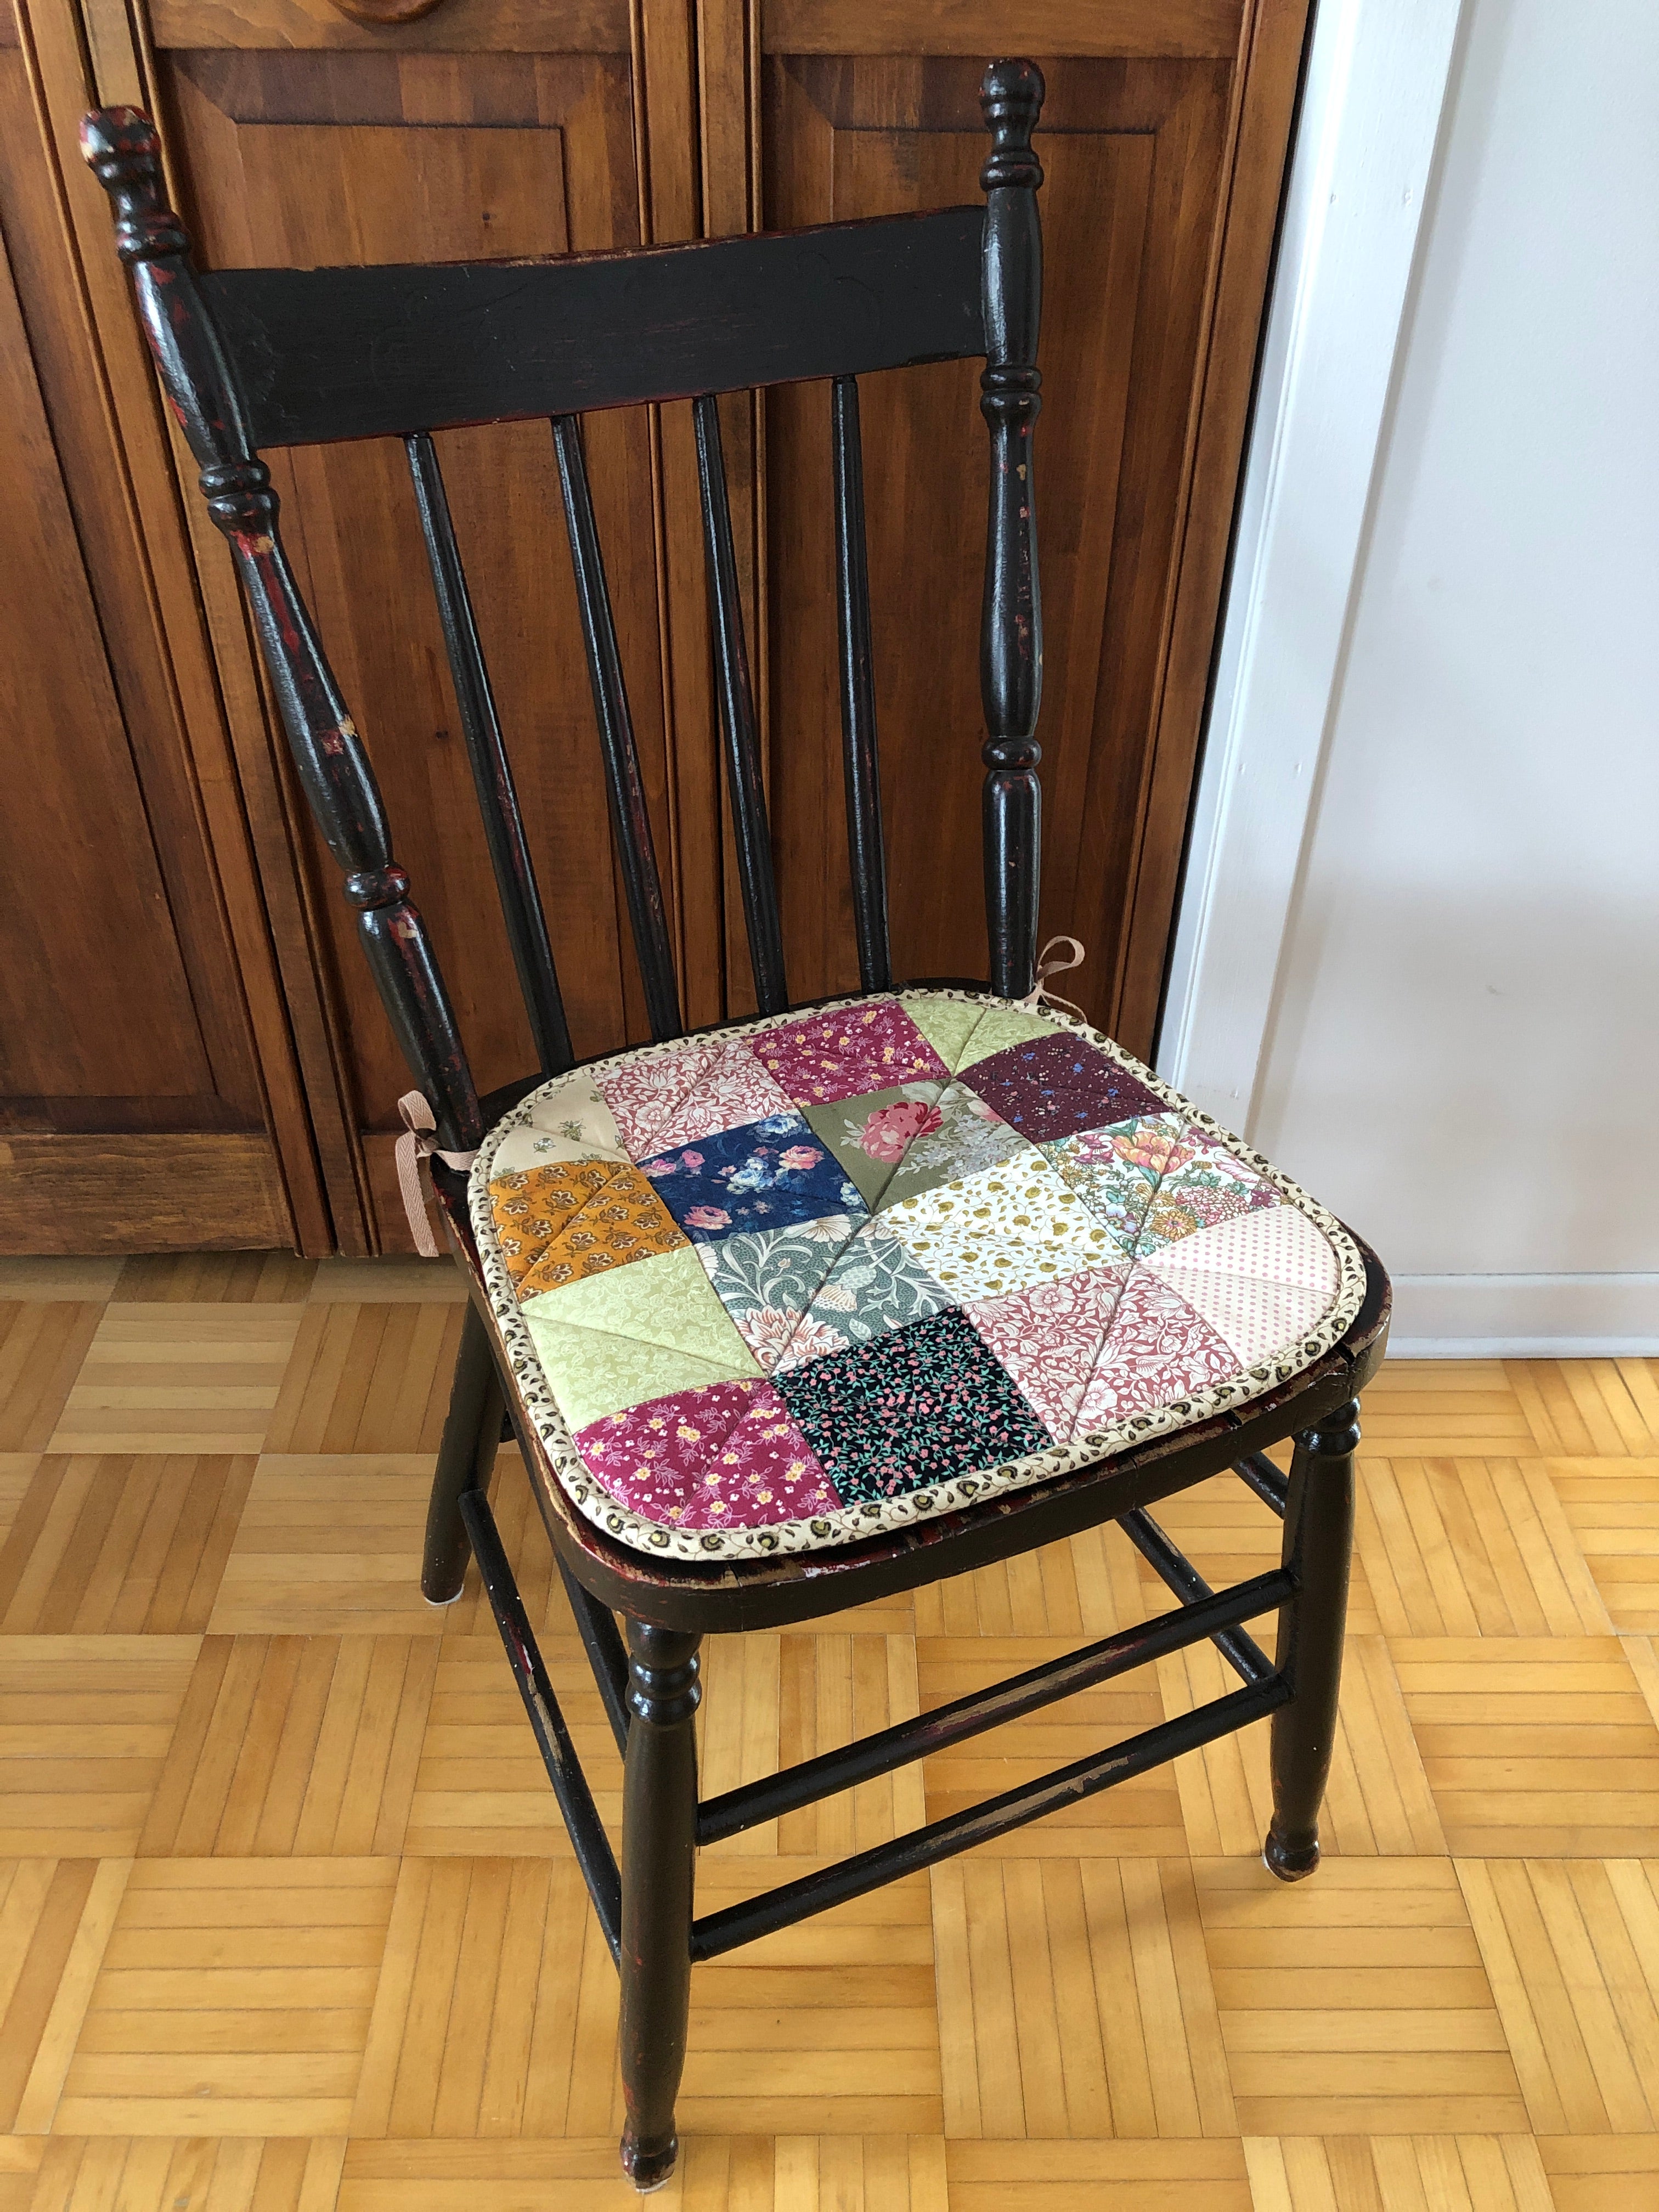 Vintage Patchwork Chair Pad #7 with Sheep Backing